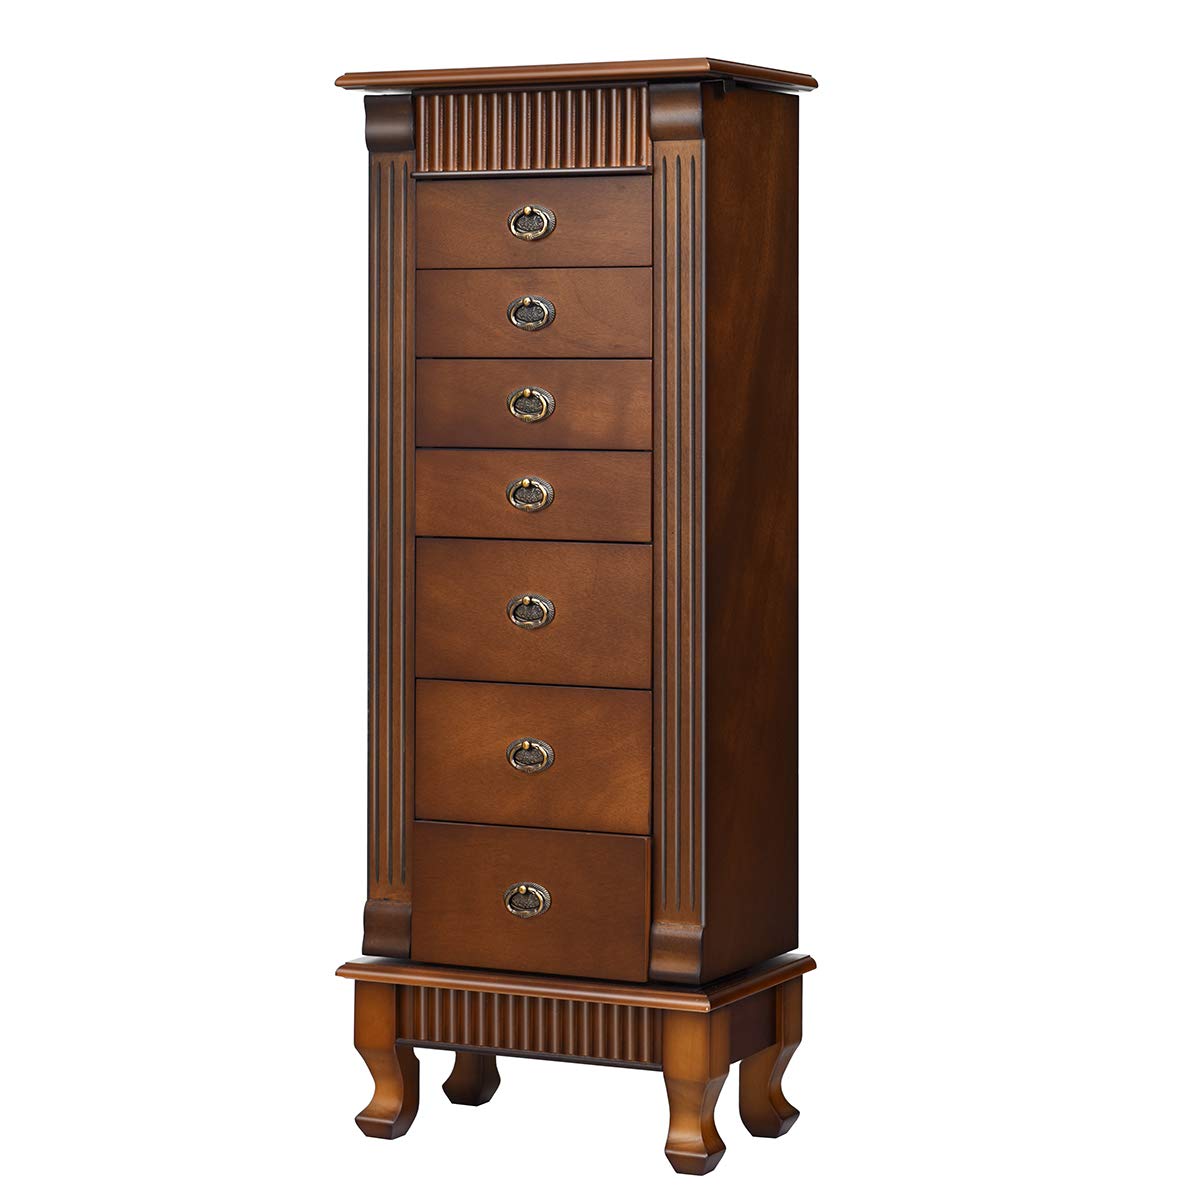 Giantex Wooden Jewelry Armoire, 7-Drawer